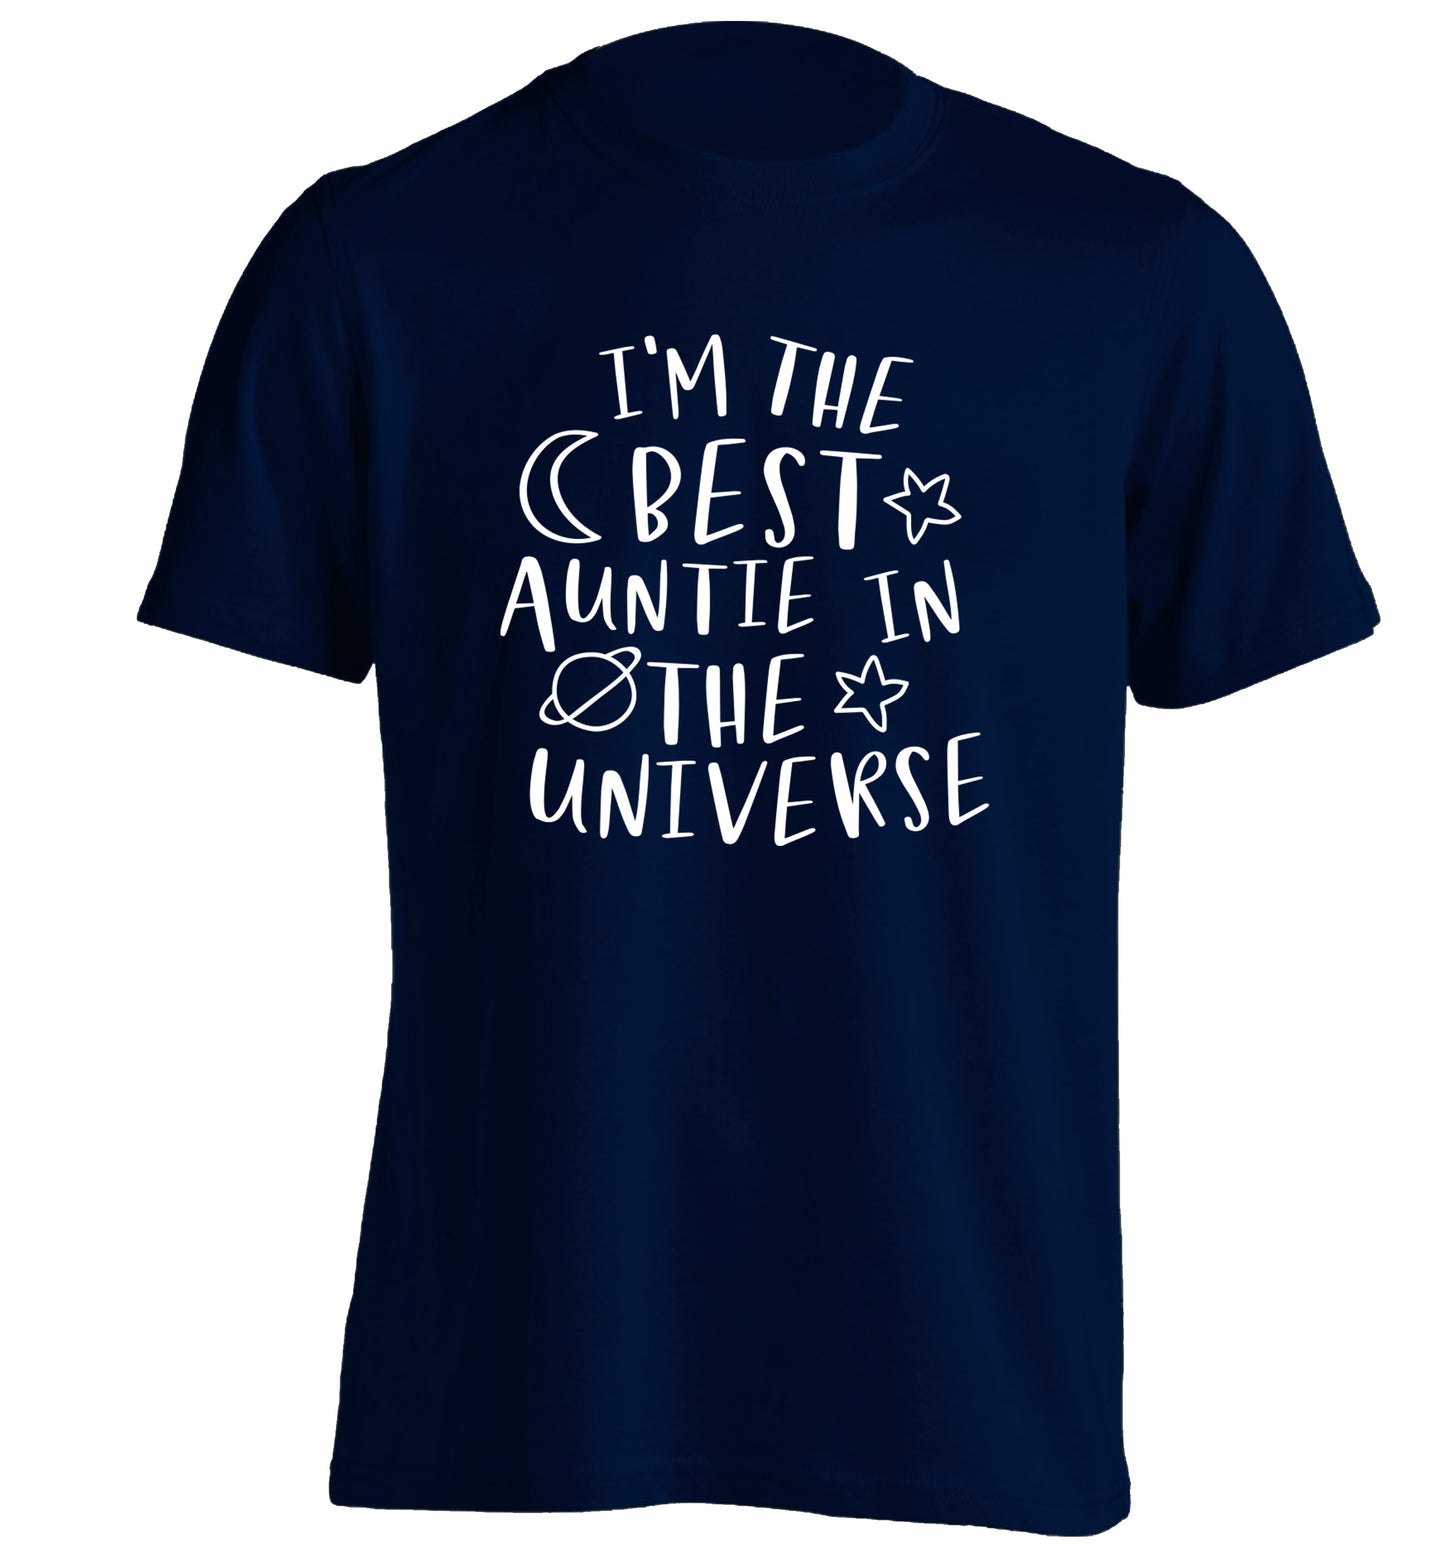 I'm the best auntie in the universe adults unisex navy Tshirt 2XL